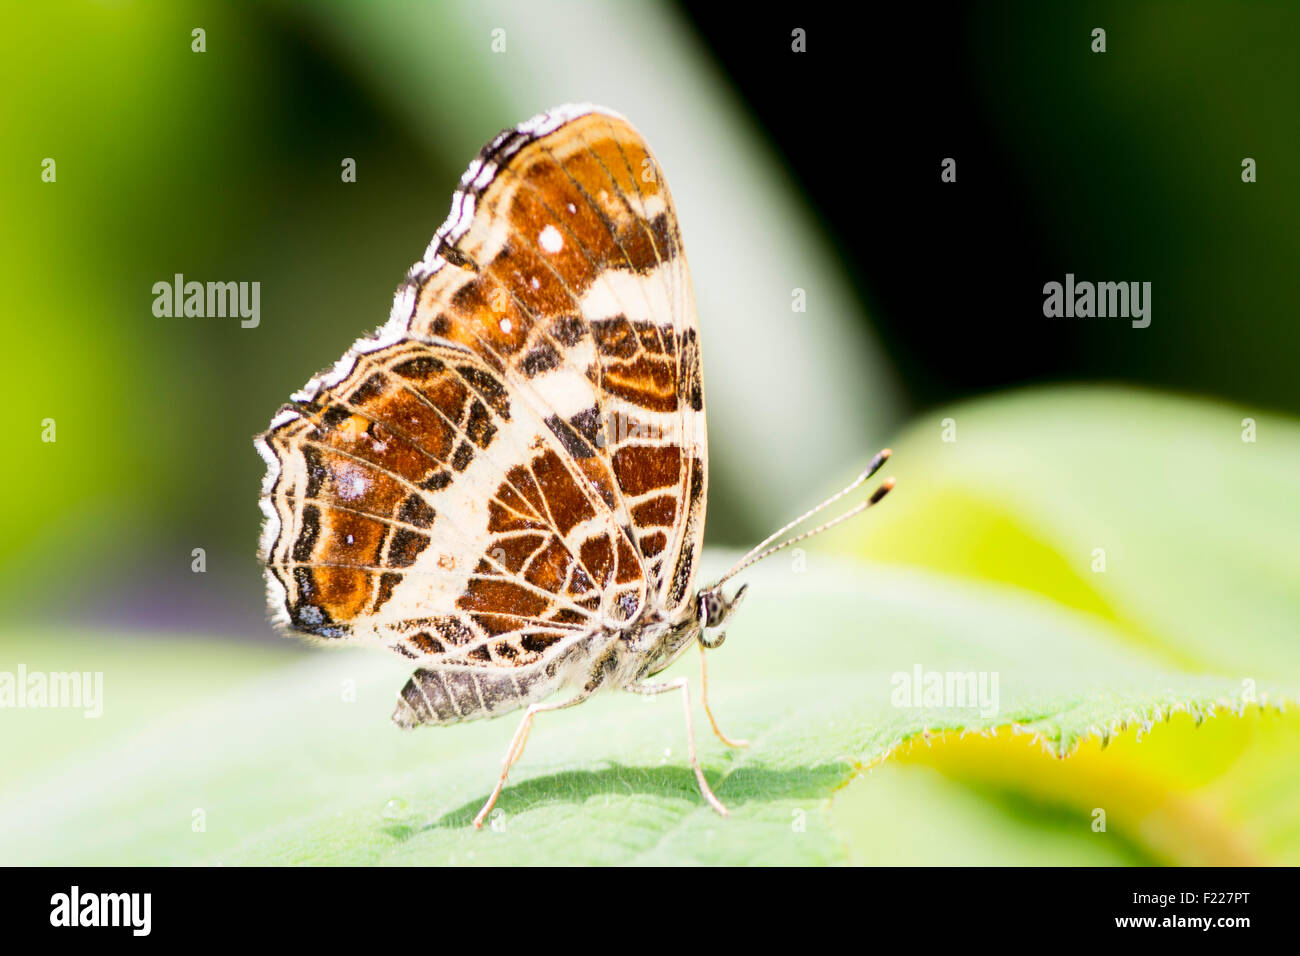 Macro of a map butterfly (Araschnia levana) sitting on a leaf Stock Photo